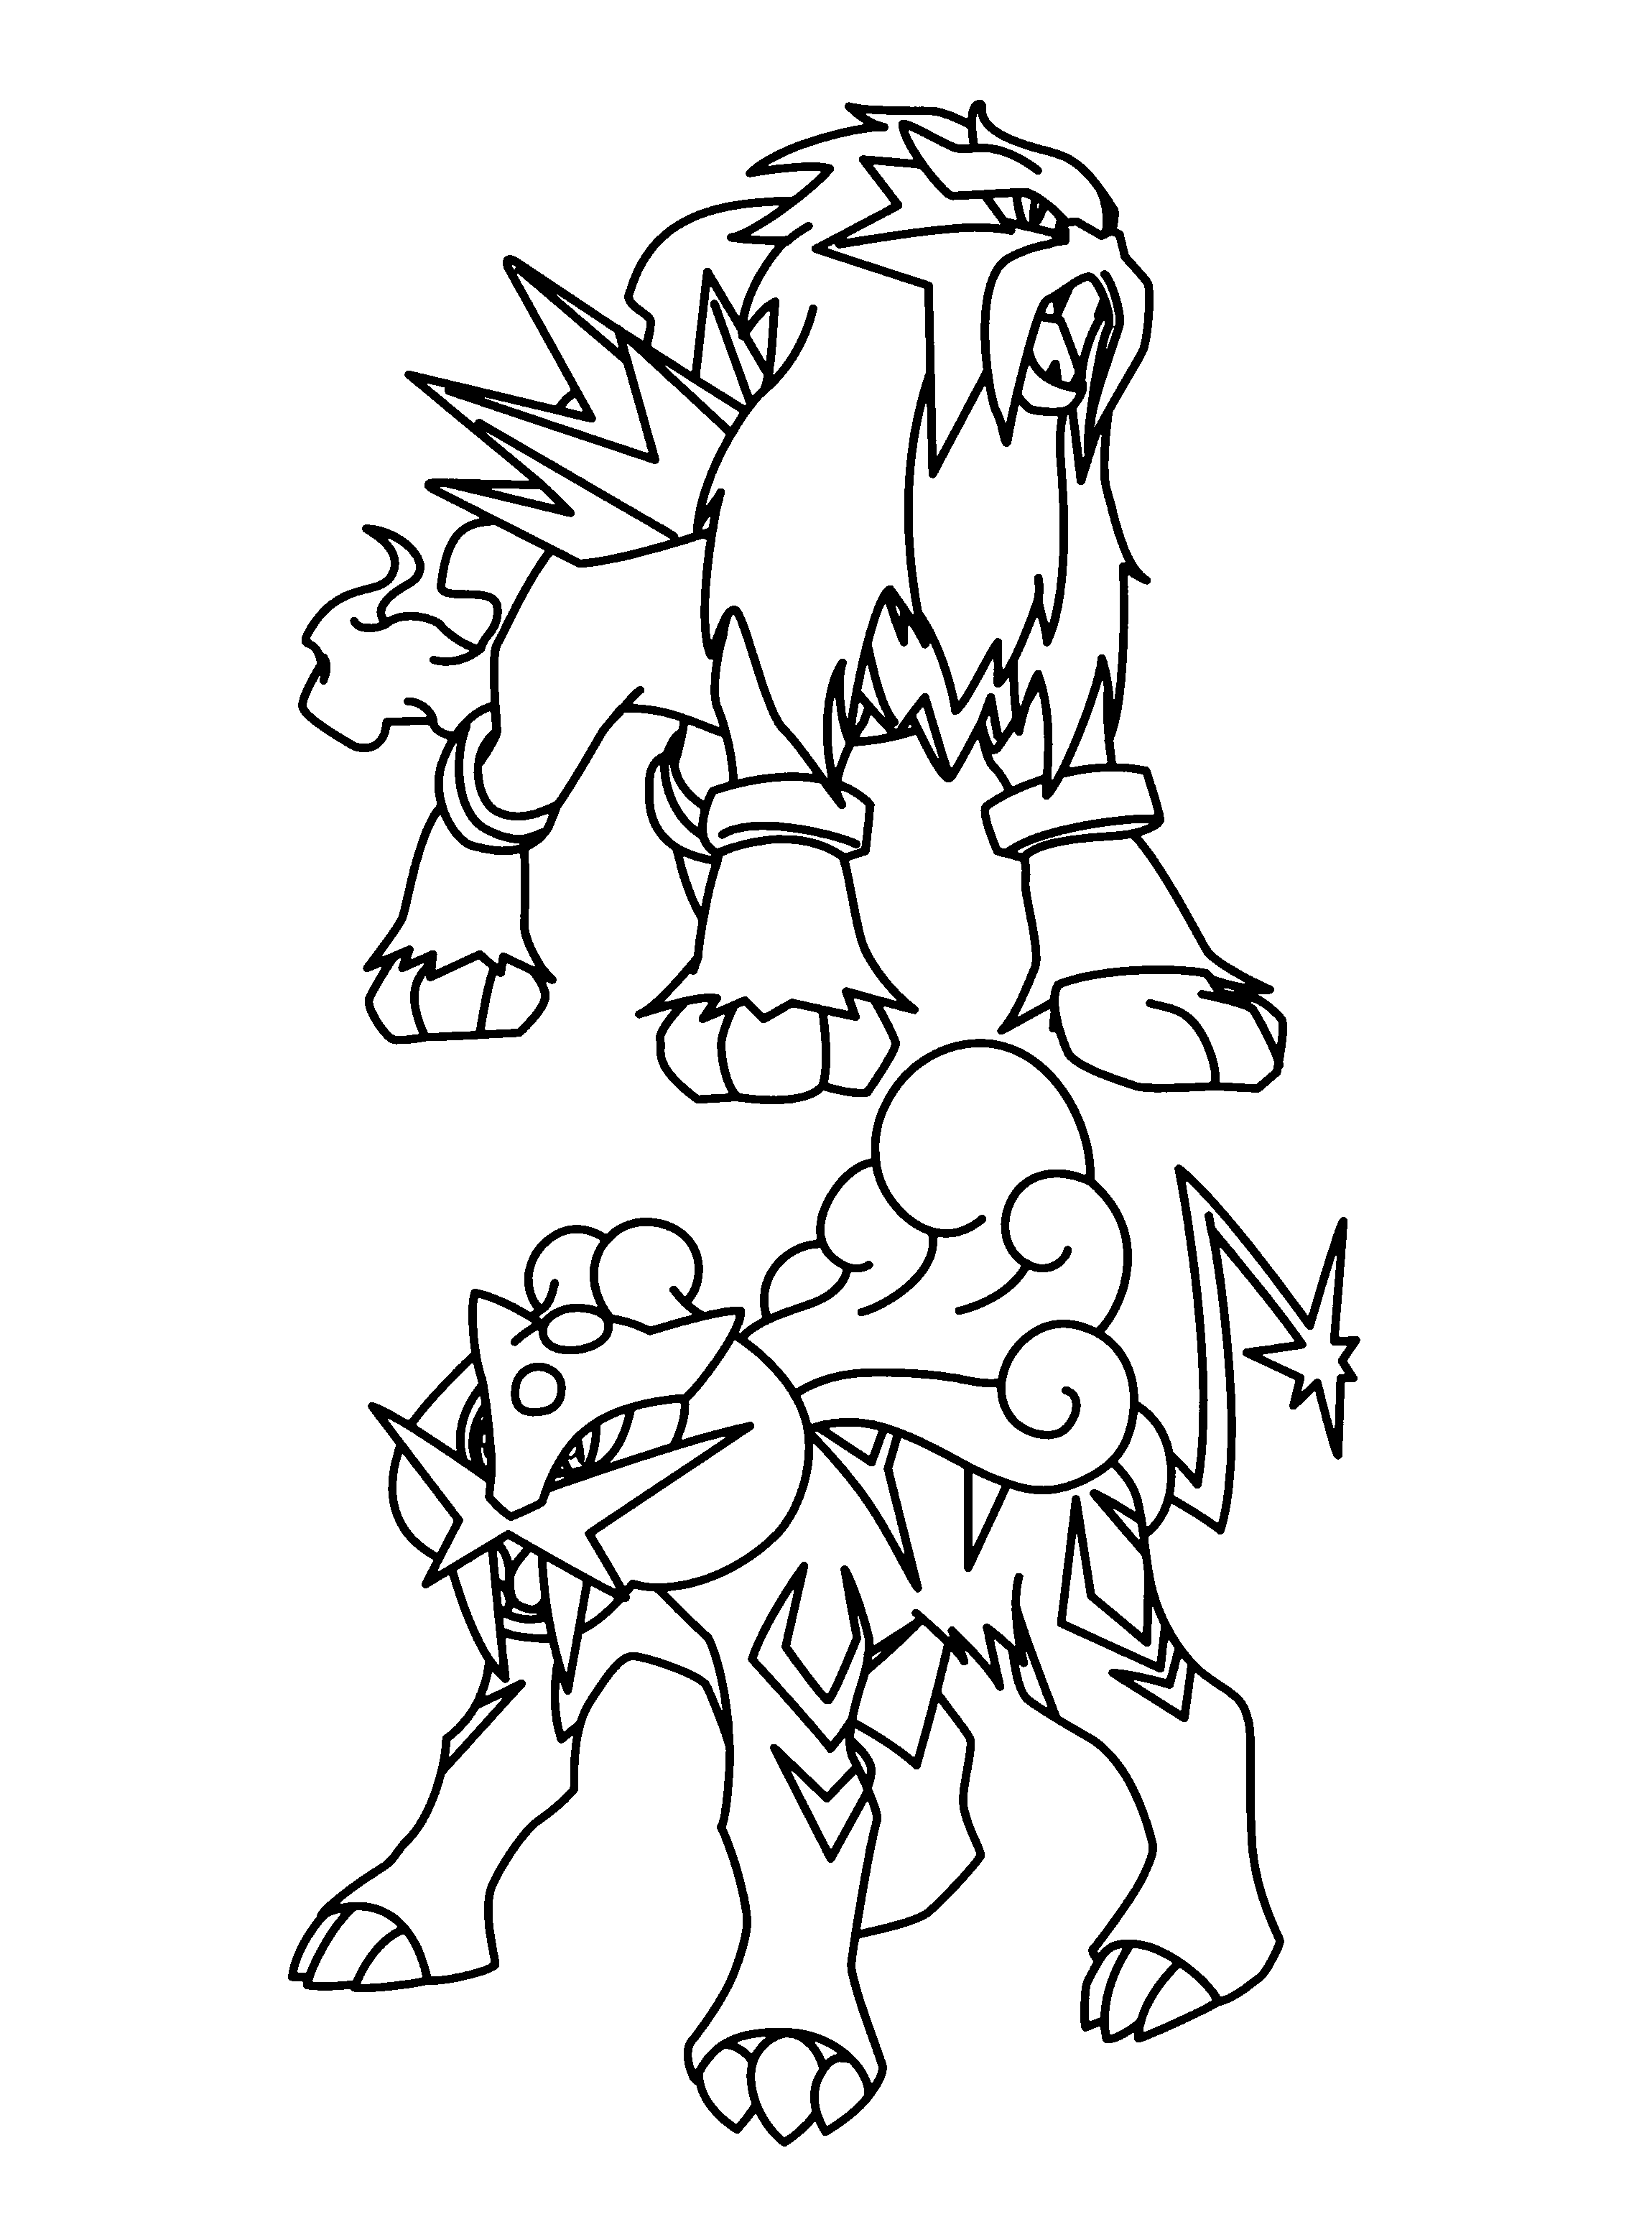 animated-coloring-pages-pokemon-image-0427